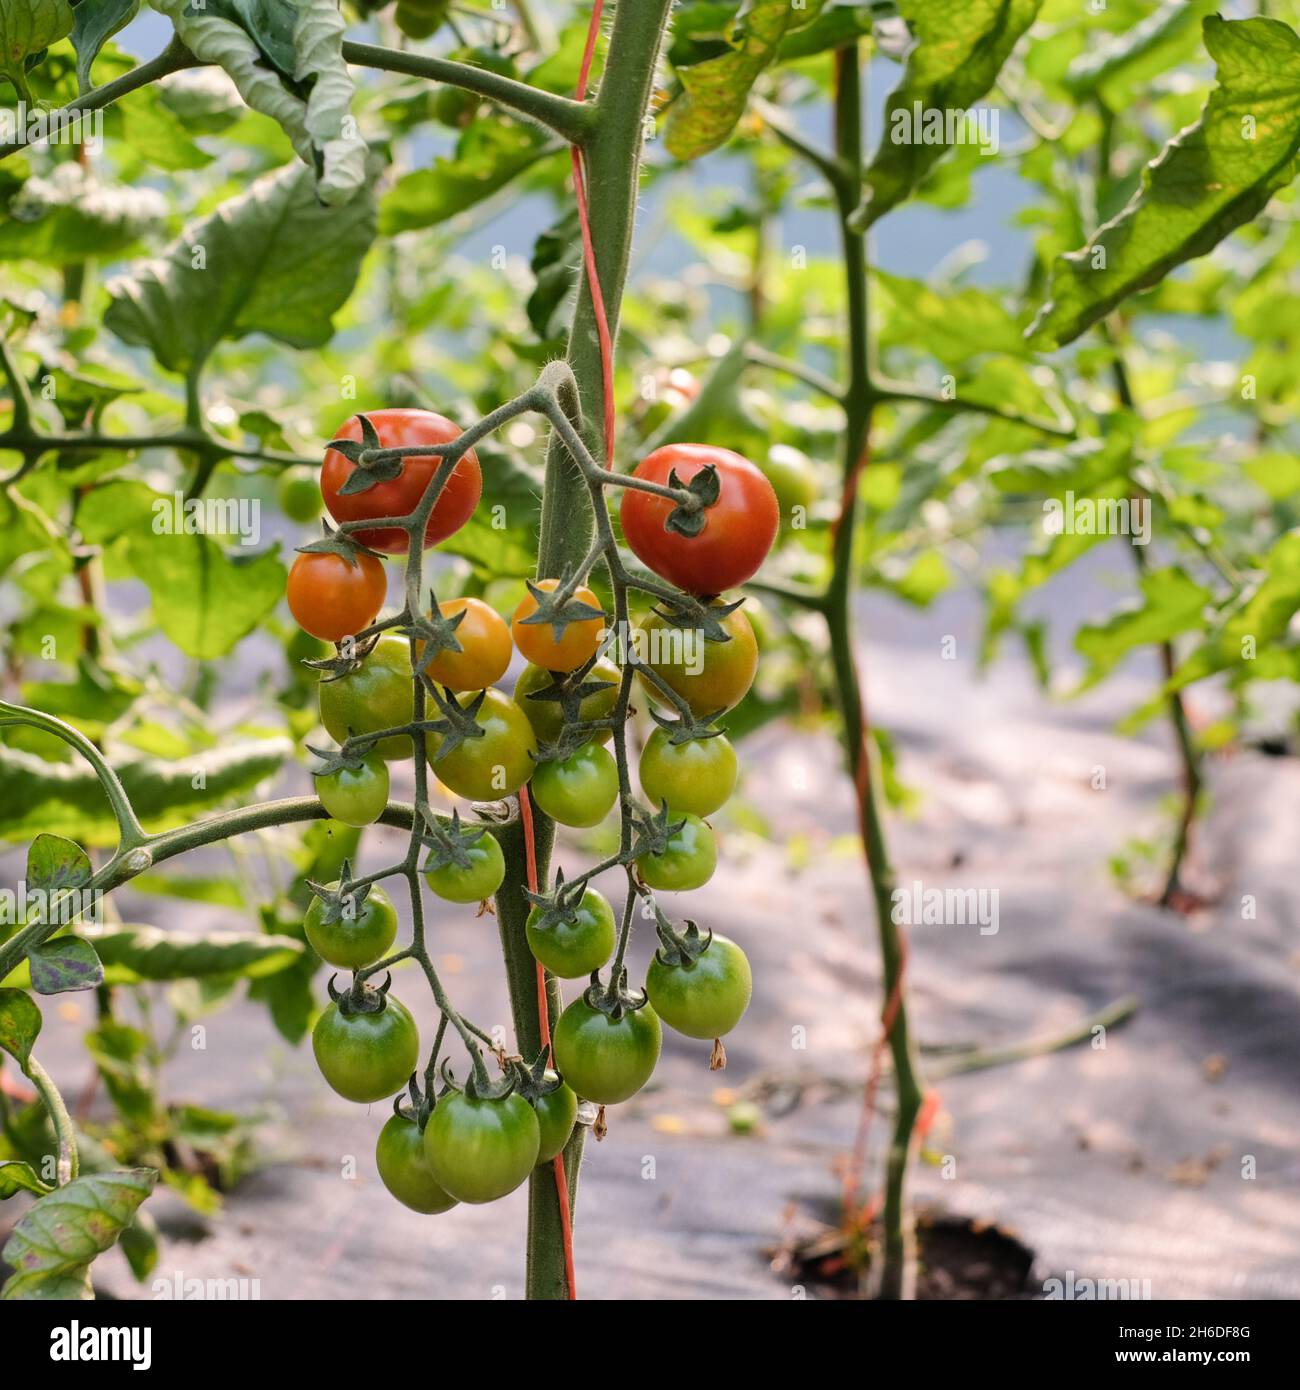 Cherry tomatoes ripening from green to red Stock Photo